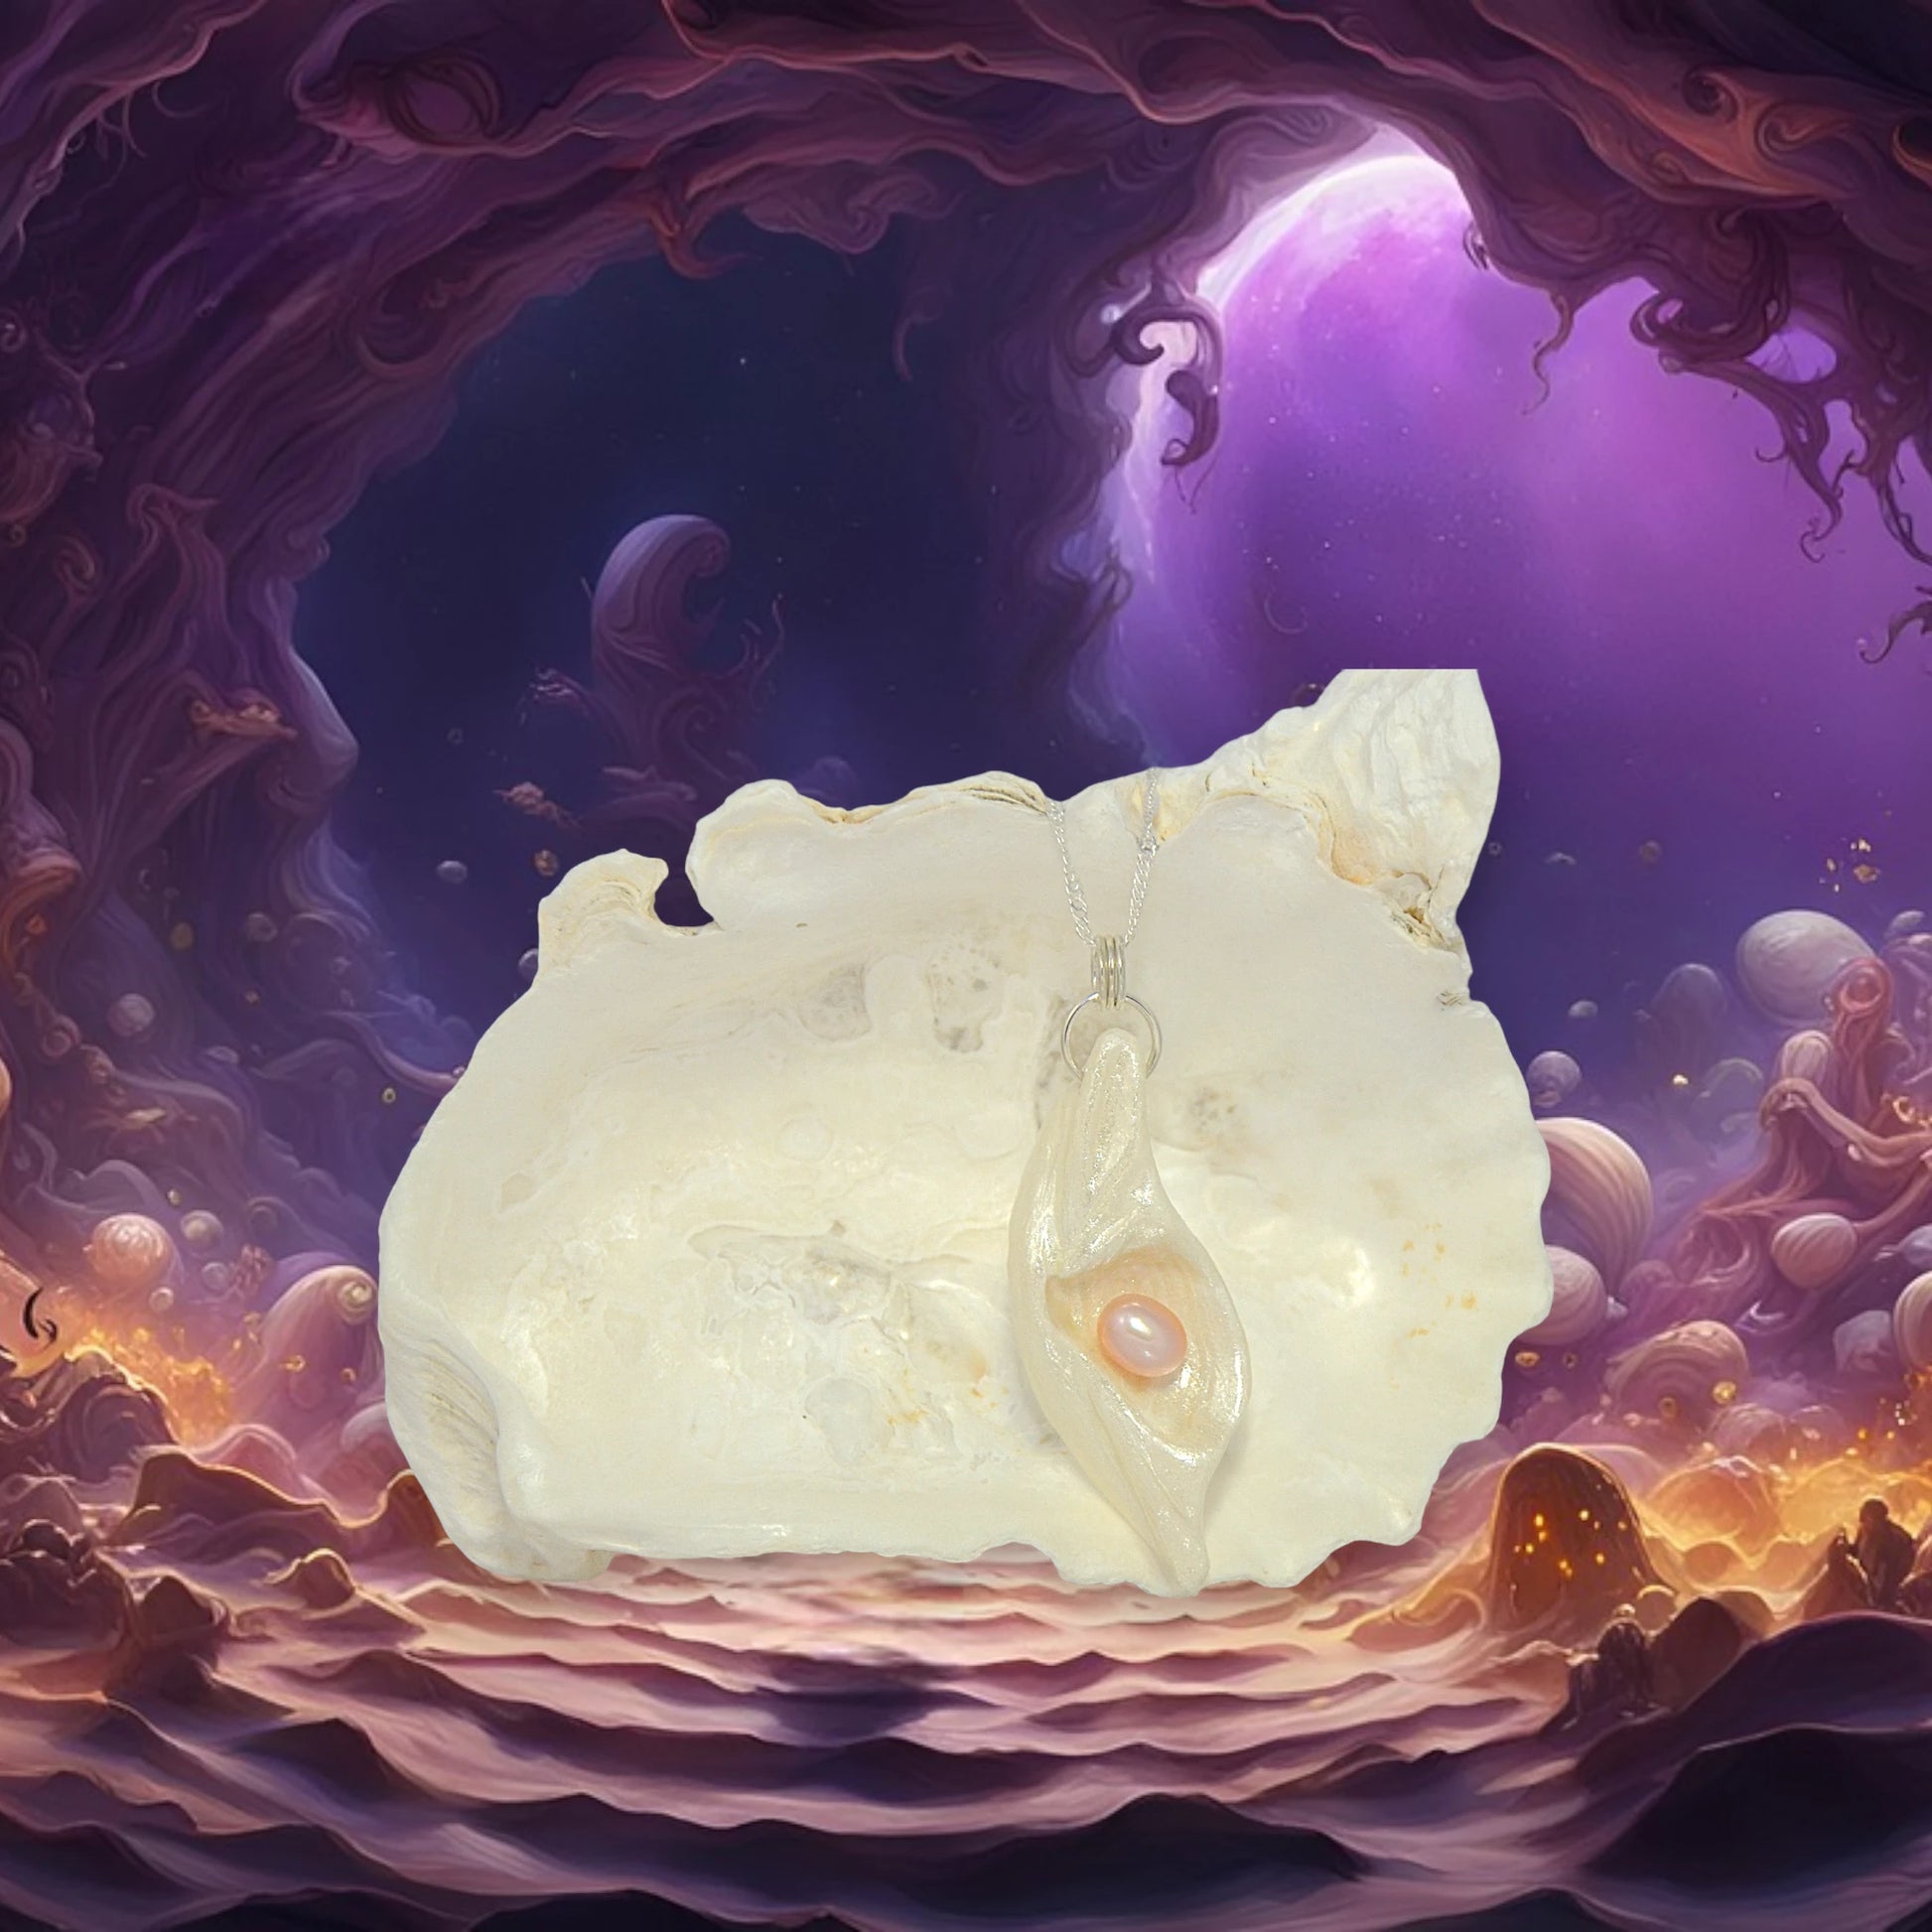 Glow natural seashell pendant with a pink freshwater pearl. The background shows a underwater cave that holds the pendant hanging on a larger seashell.